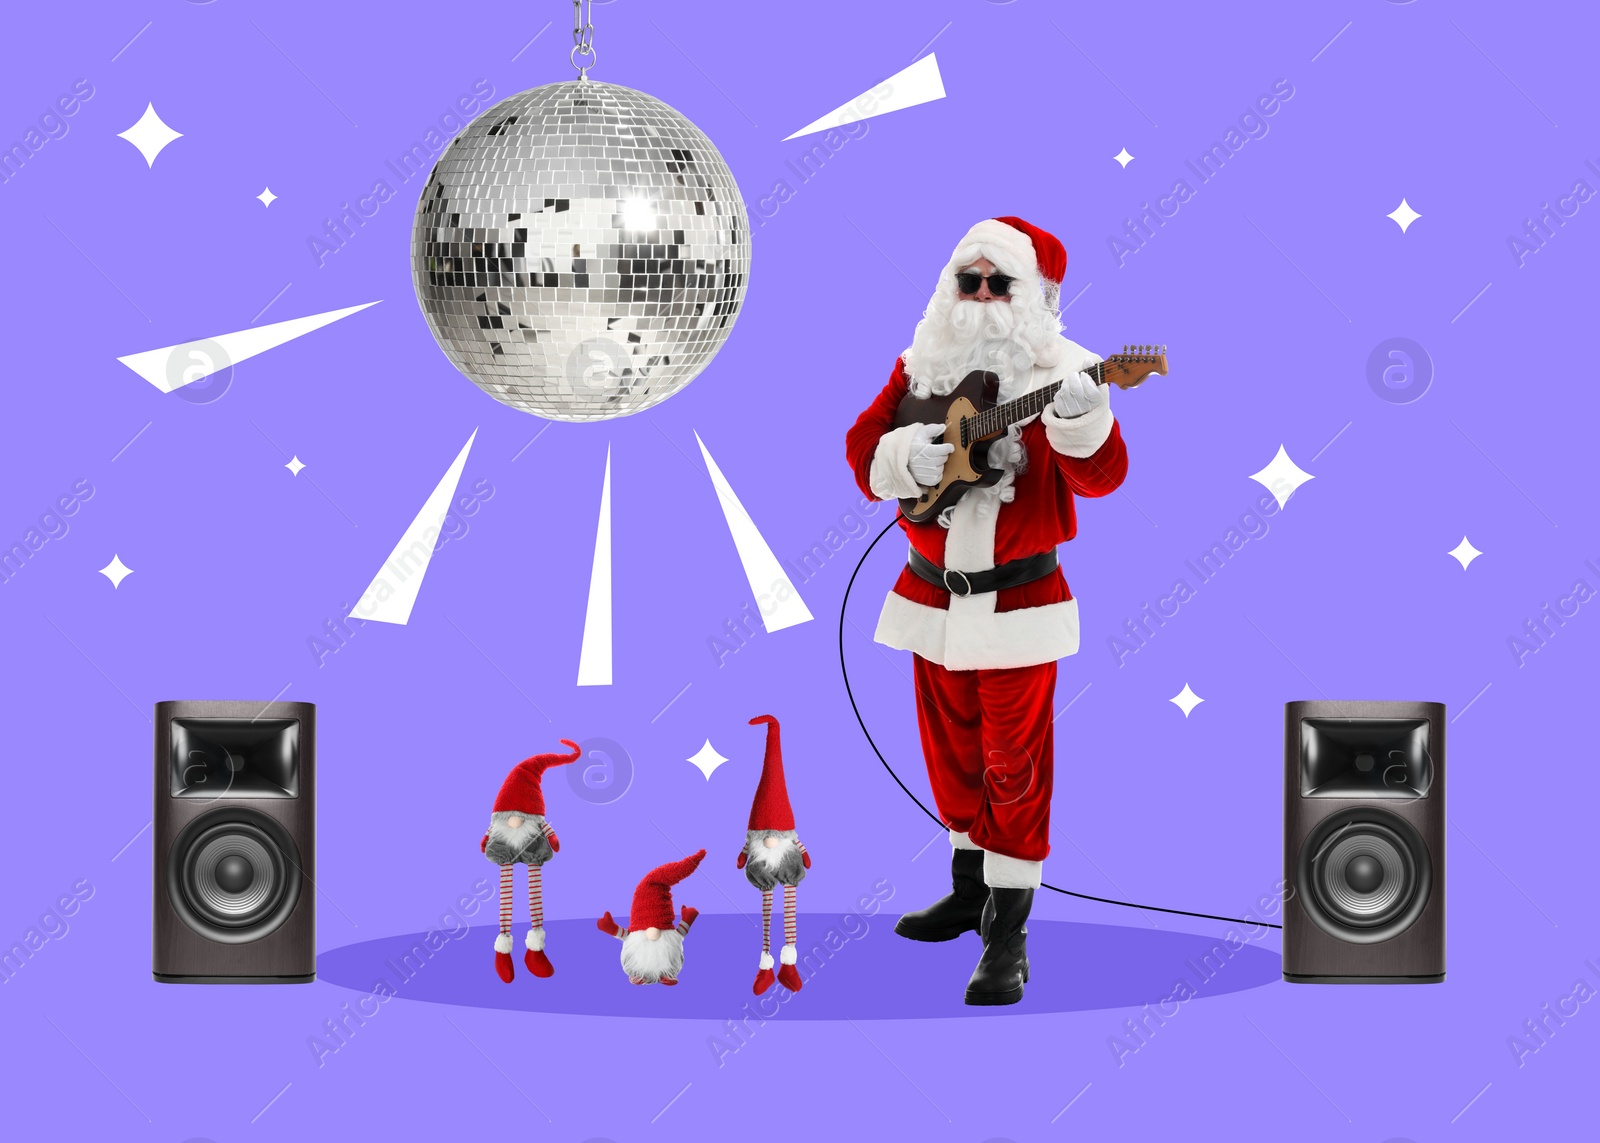 Image of Winter holidays bright artwork. Santa Claus playing guitar, elves dancing against violet background, creative collage